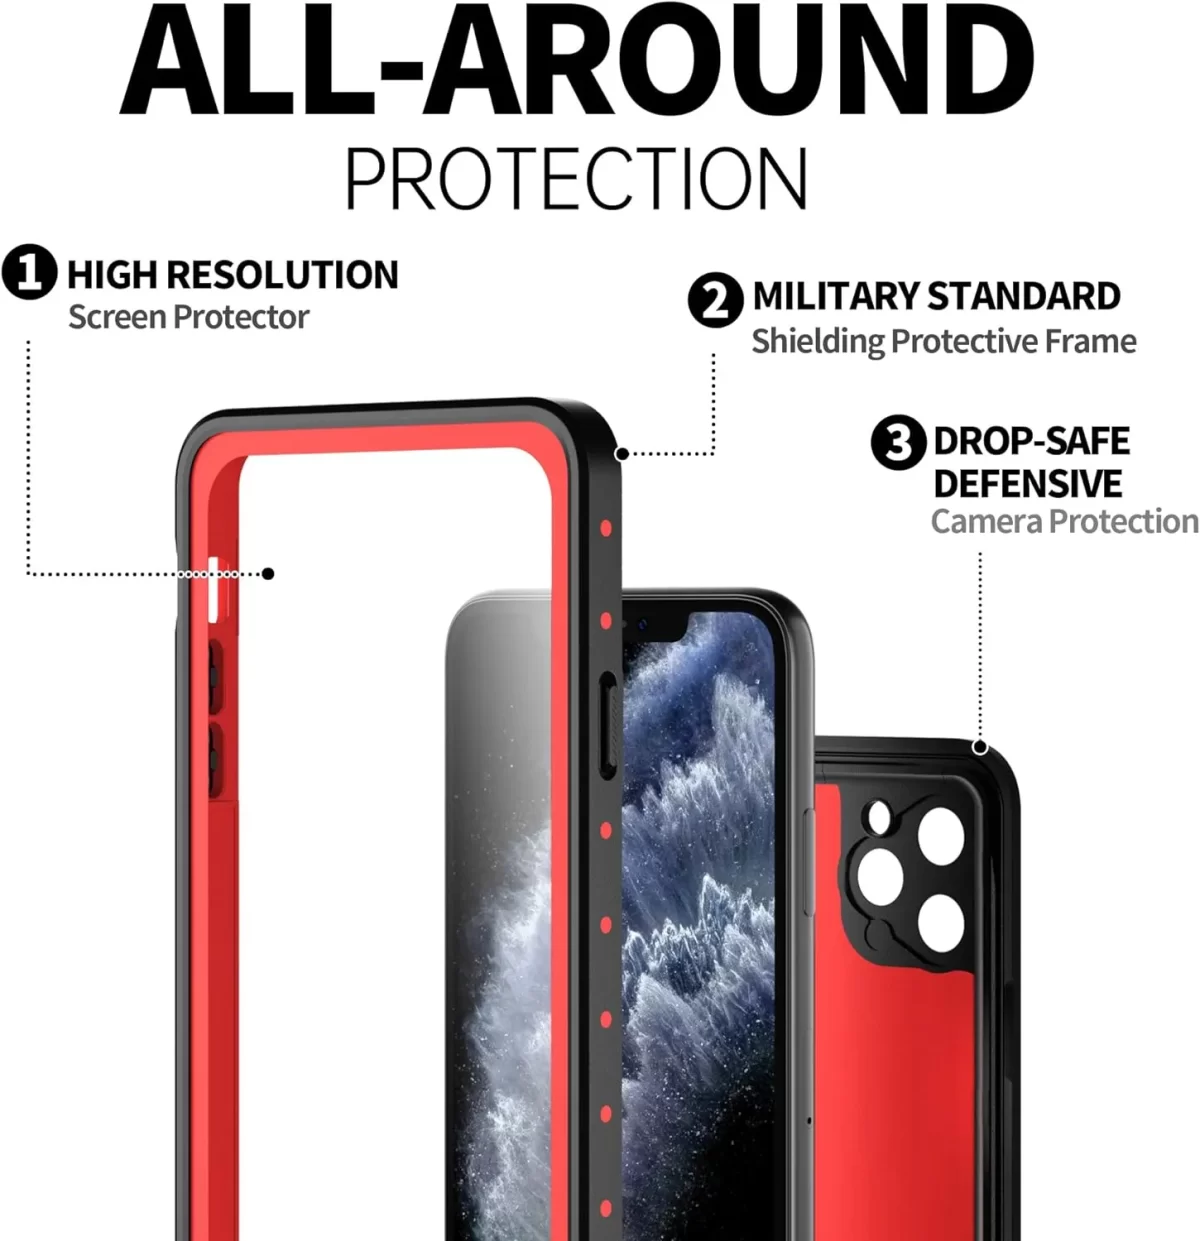 IP68 Waterproof, High-Quality Phone Case for iPhone 11 Pro Max | Full Body Protection with Built-in Screen Protector | Shockproof, Dustproof, Drop-proof, Magnetic Closure | 1-Year Warranty | Coral Case